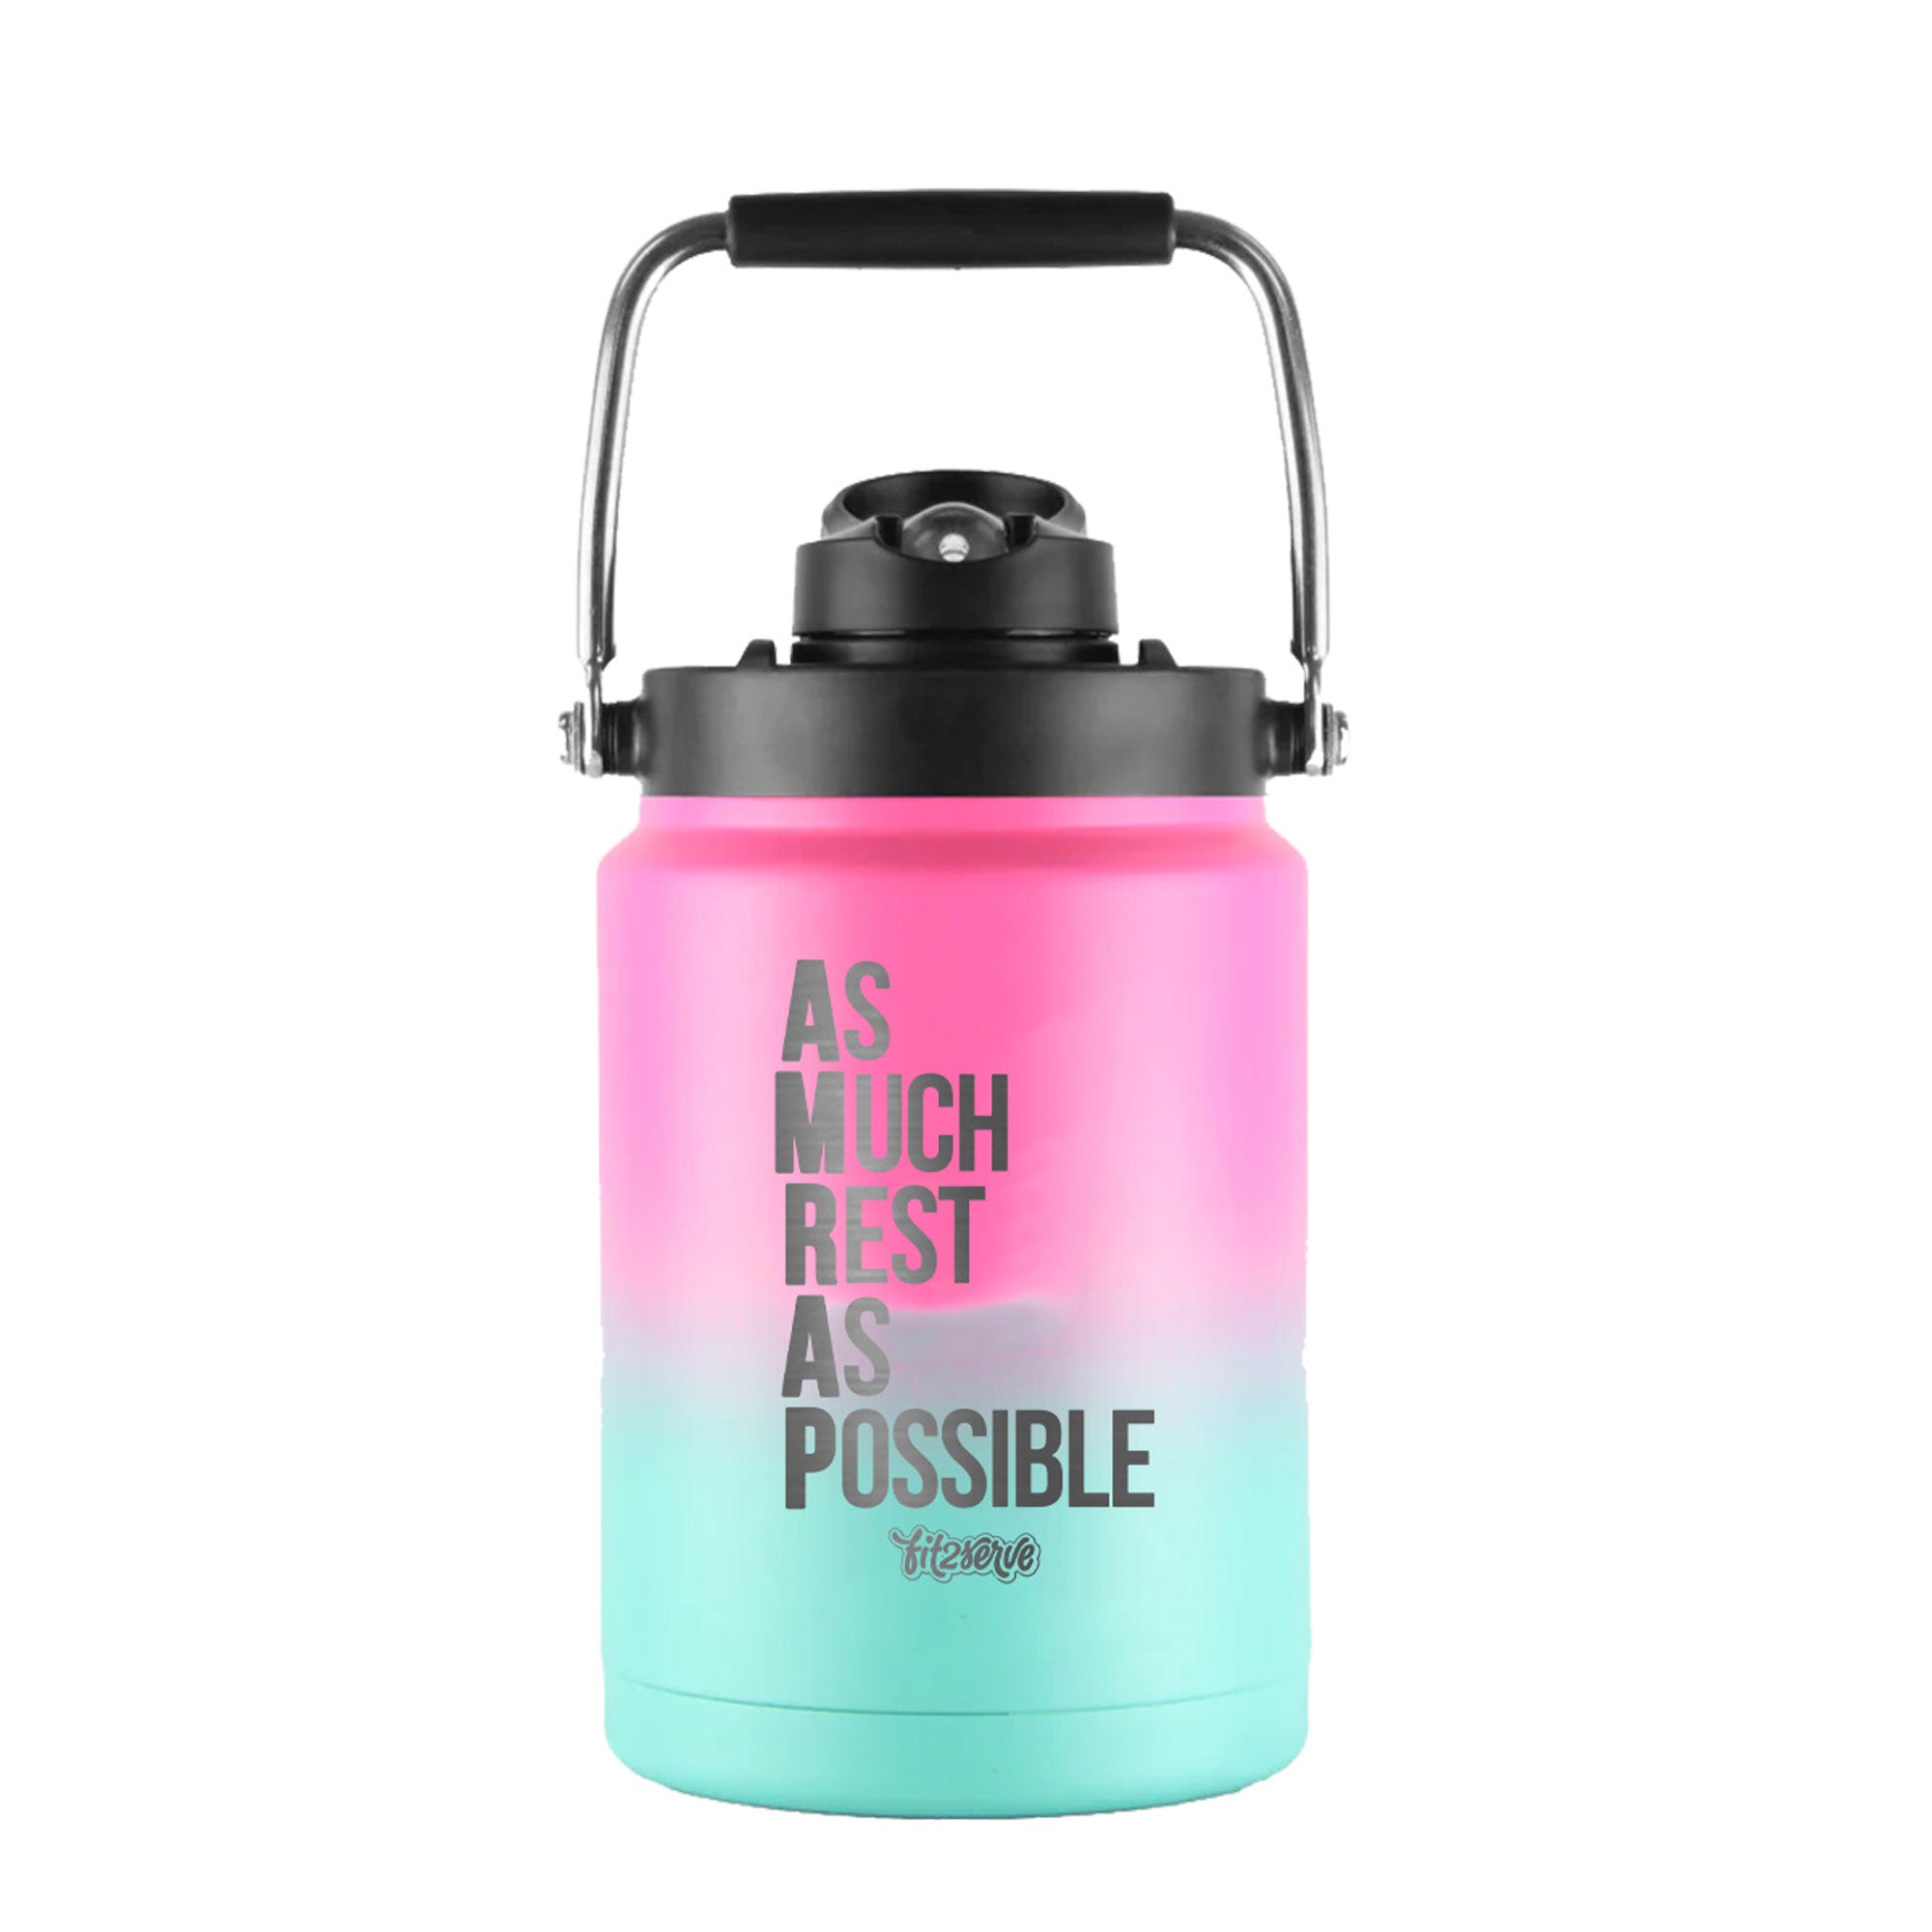 FIT2SERVE As Much Rest As Possible Half Gallon Jug - Mint Pink Ombre